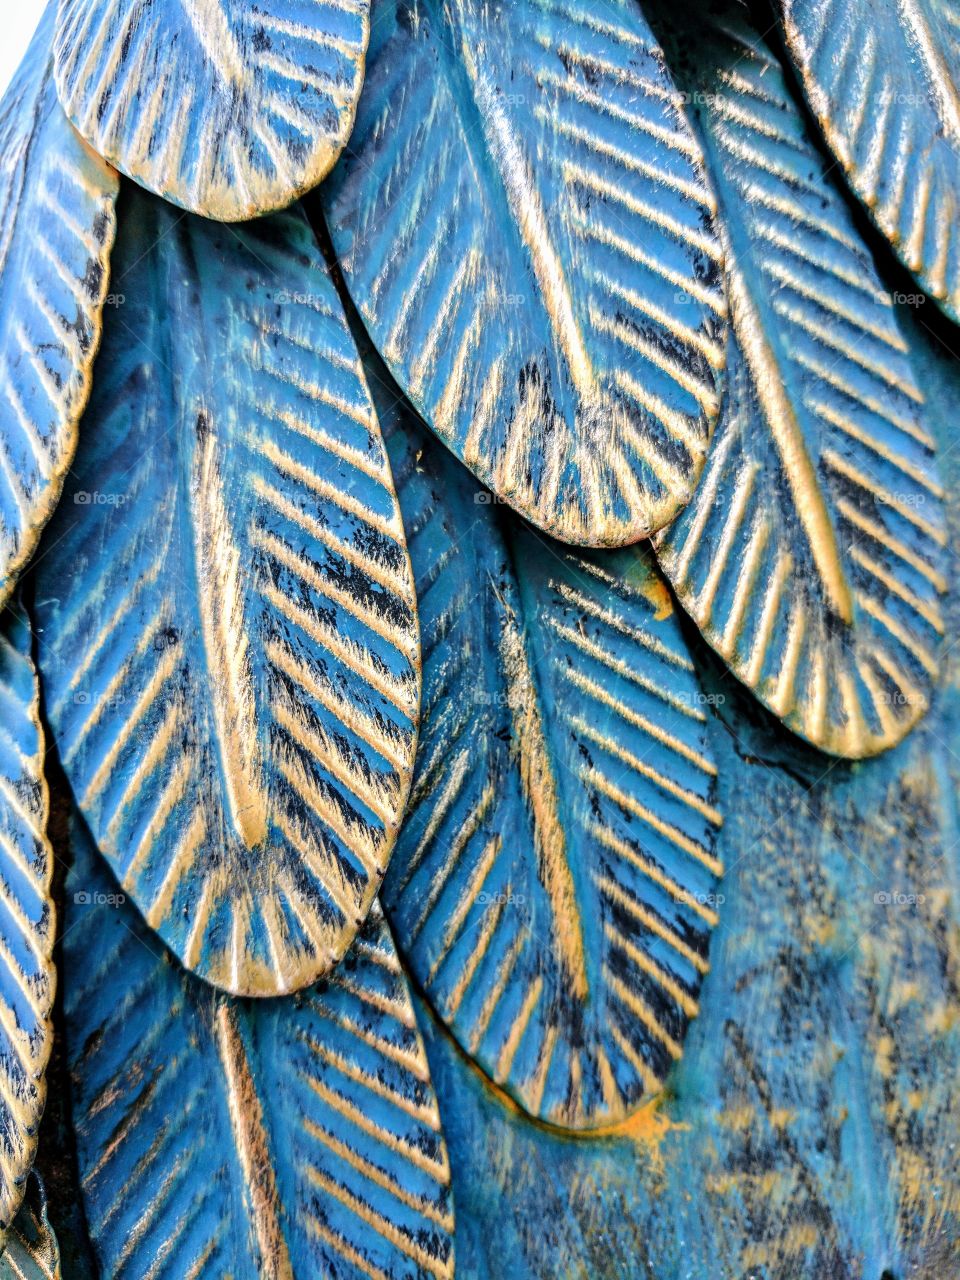 Steel Feathers